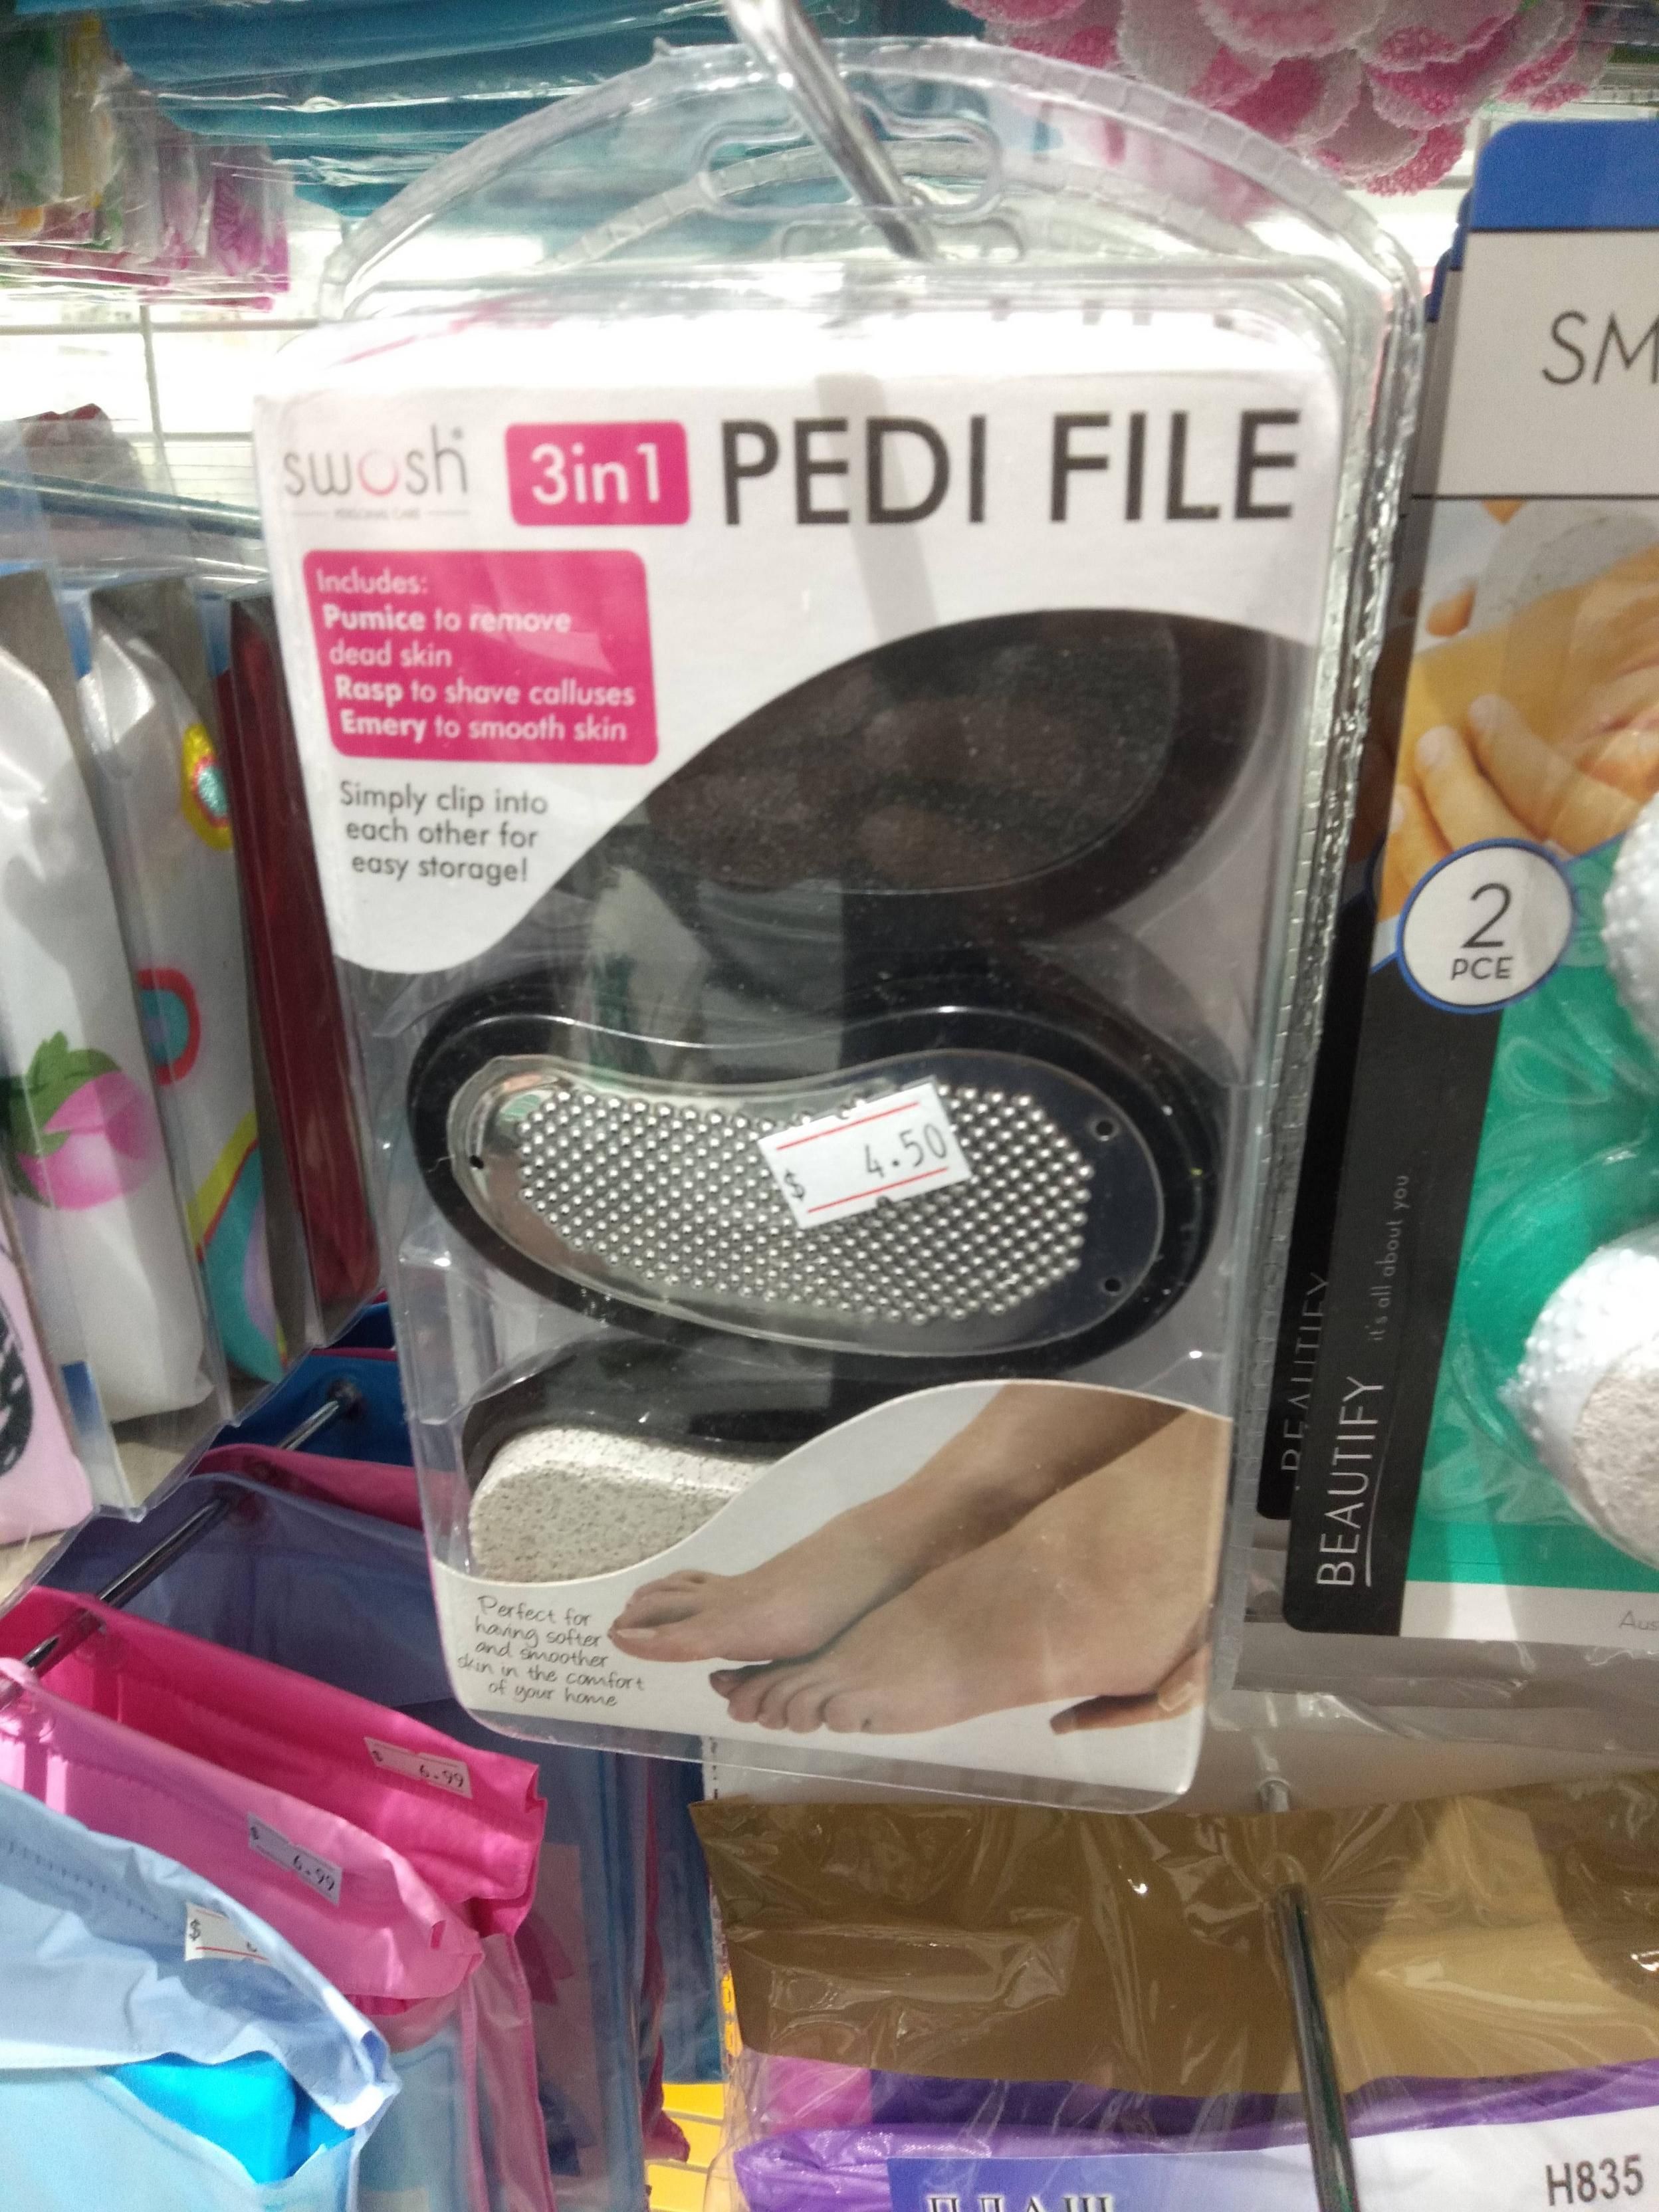 Unfortunate product name